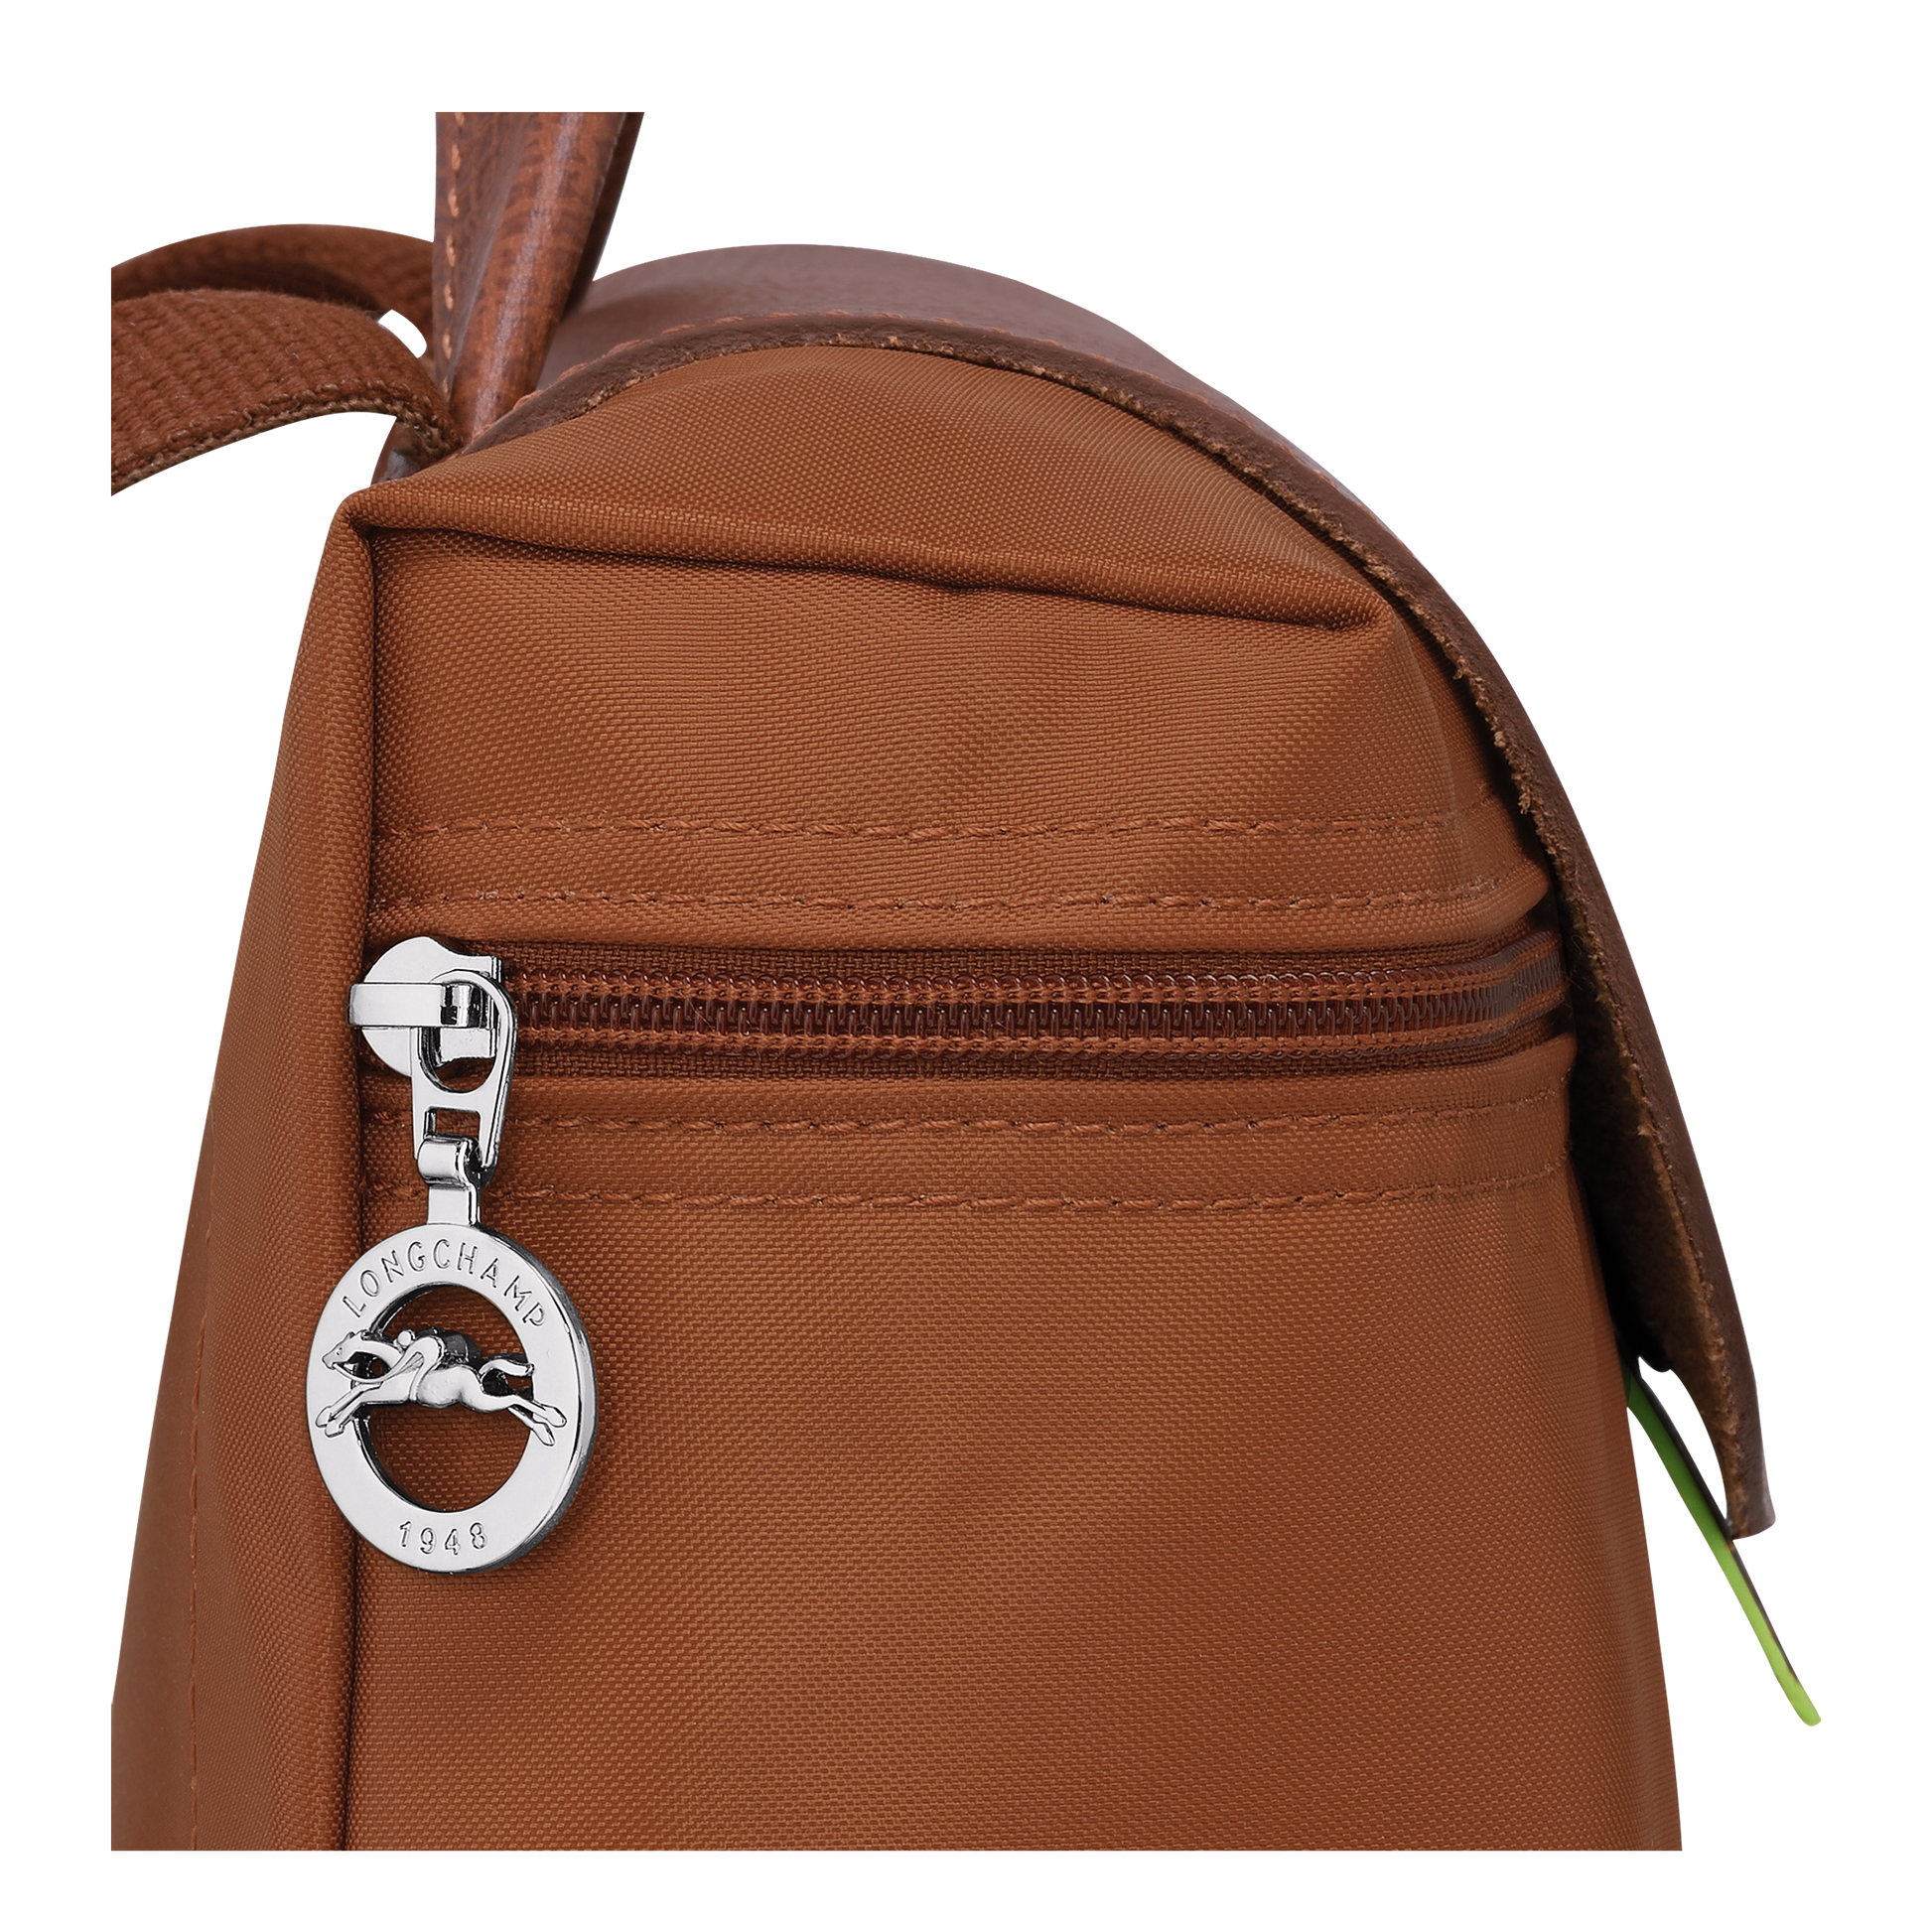 Le Pliage Green Backpack